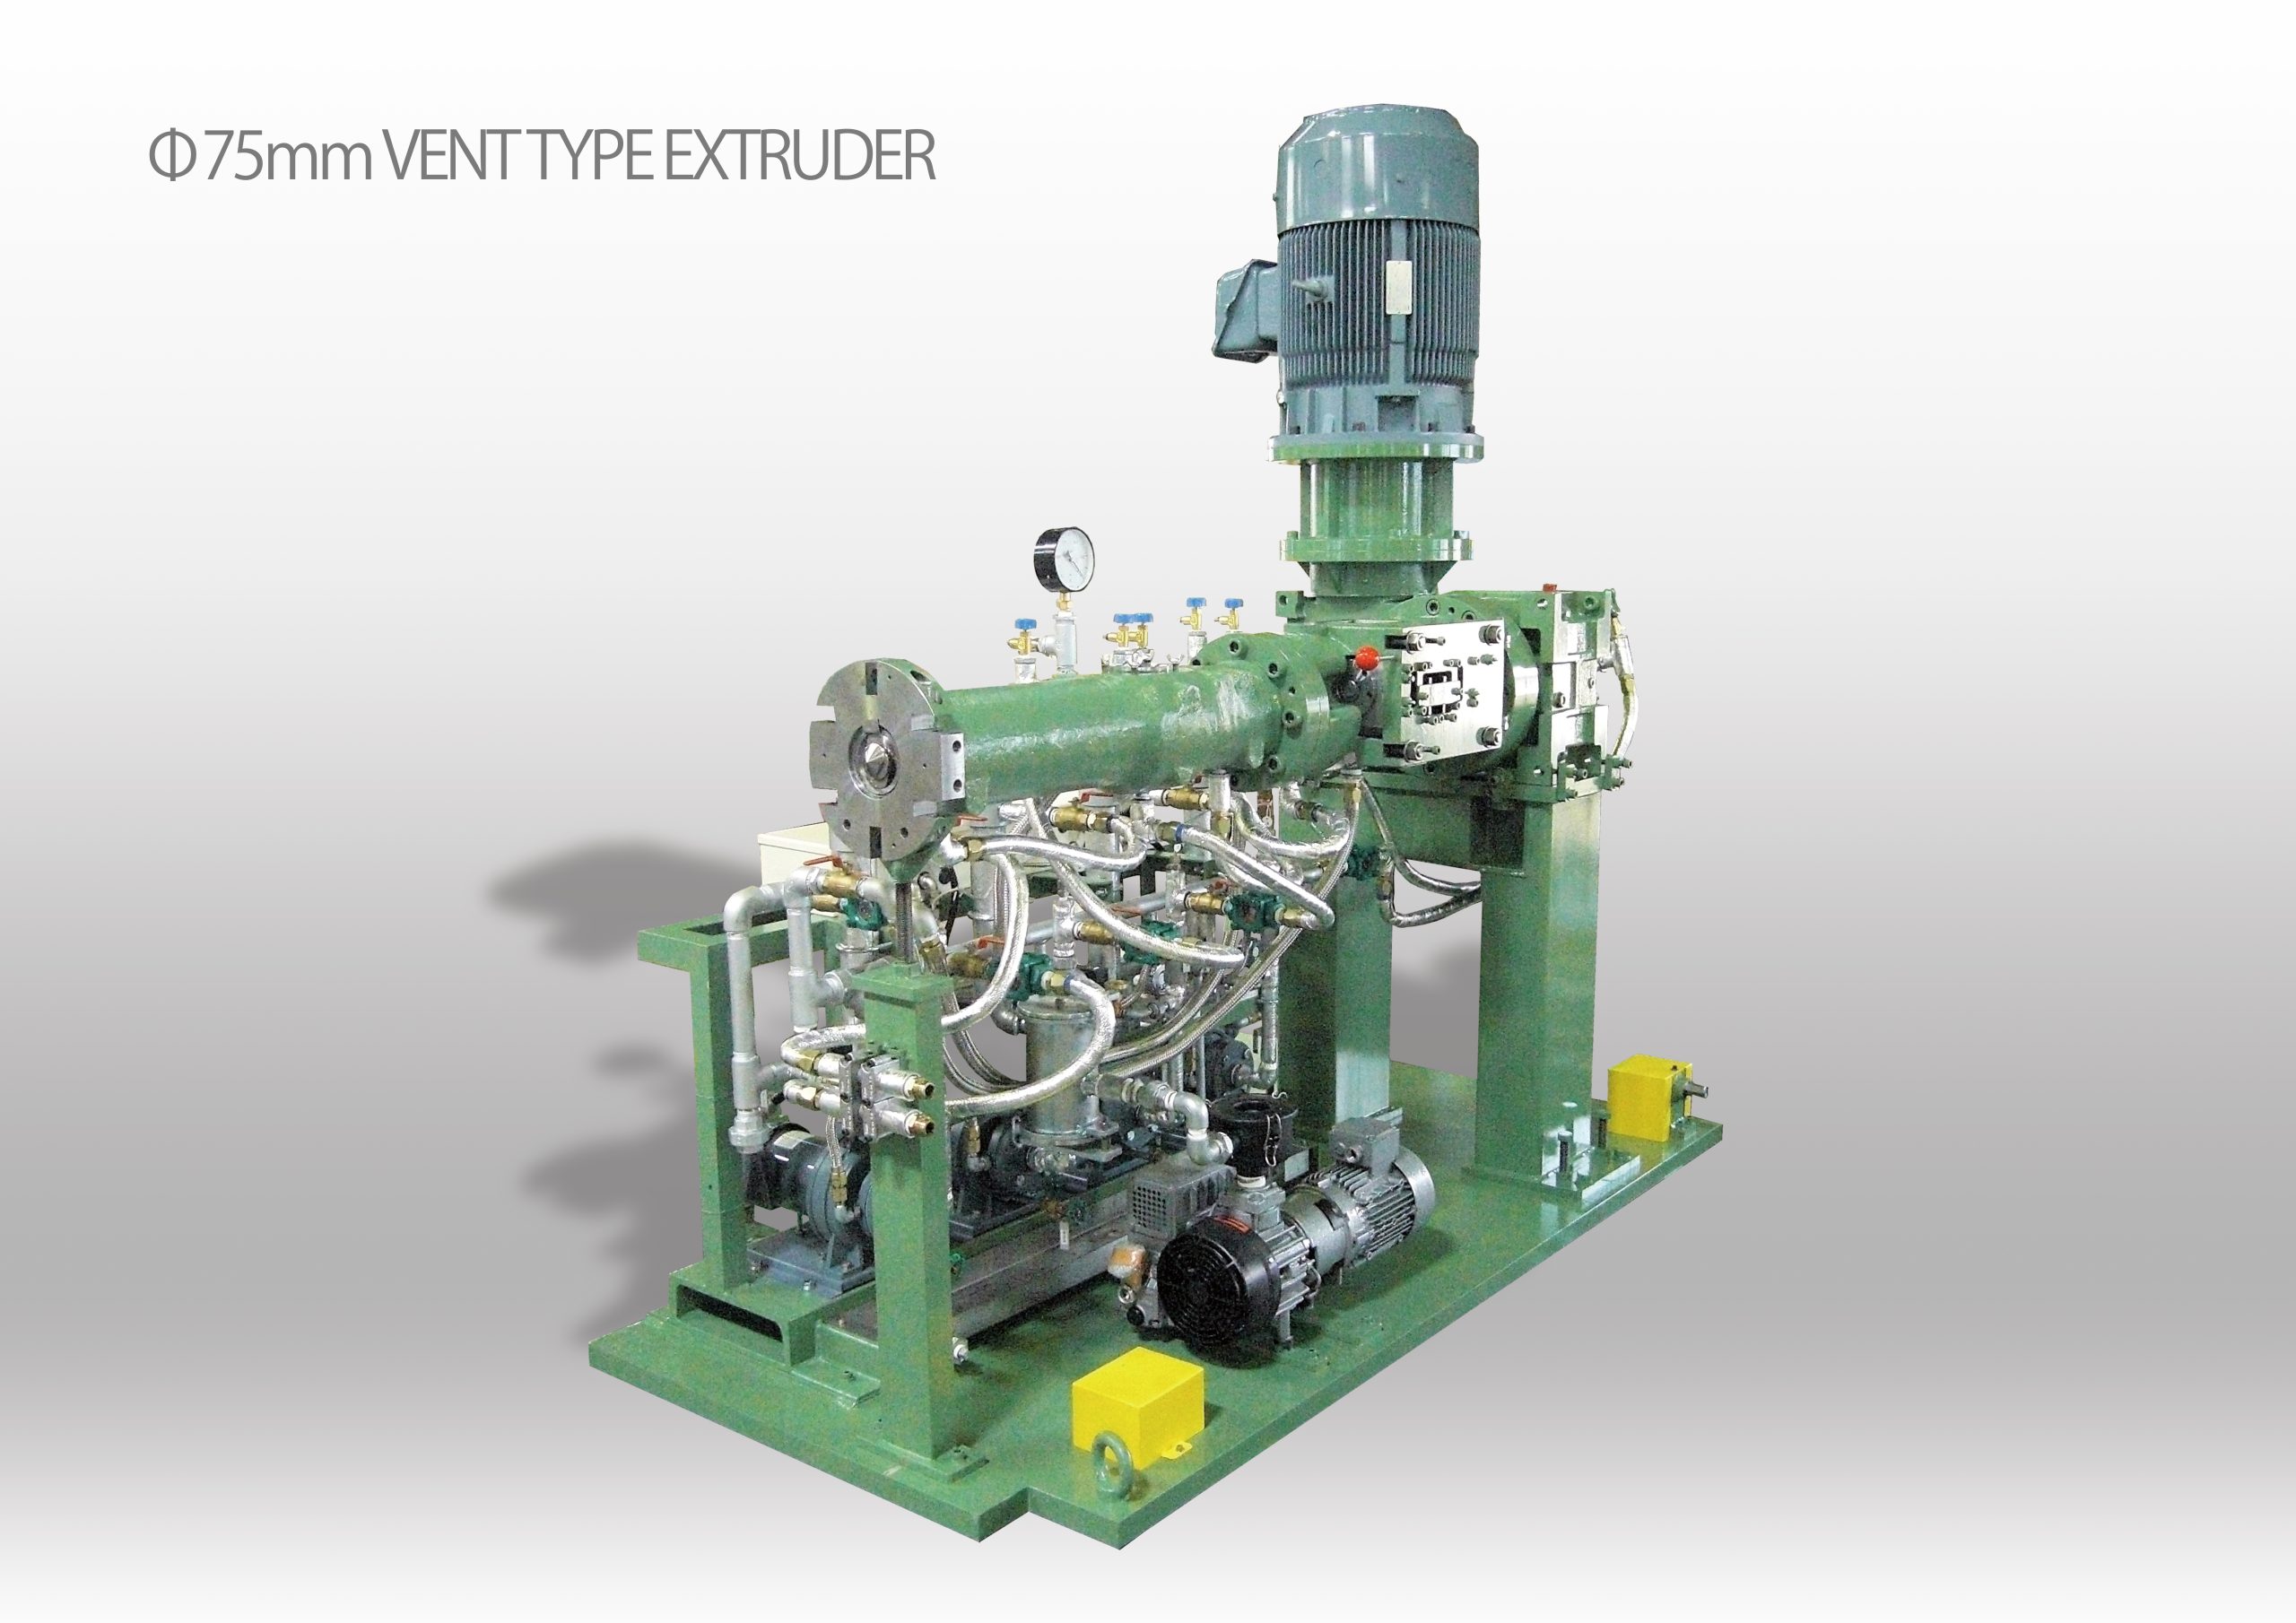 Extruders - an overview